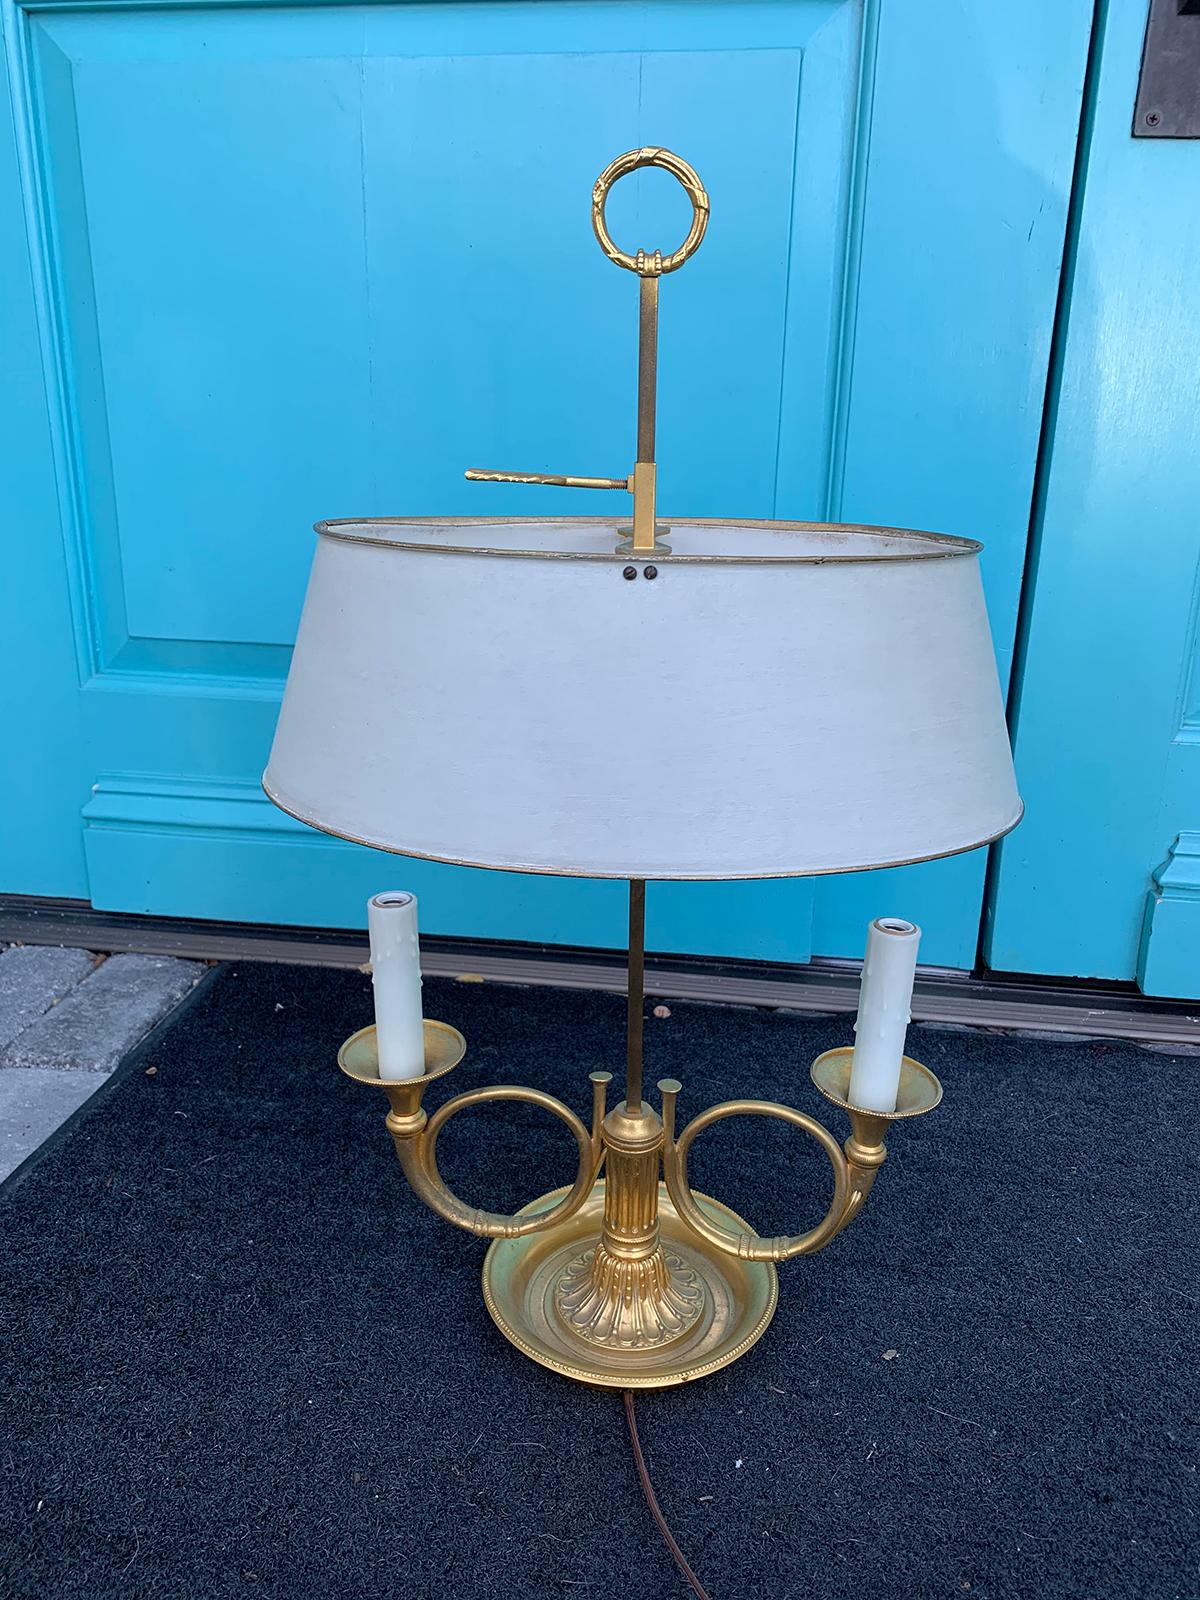 20th Century Bronze Two-Arm Bouillotte Lamp, French Horns, Painted Tole Shade 1